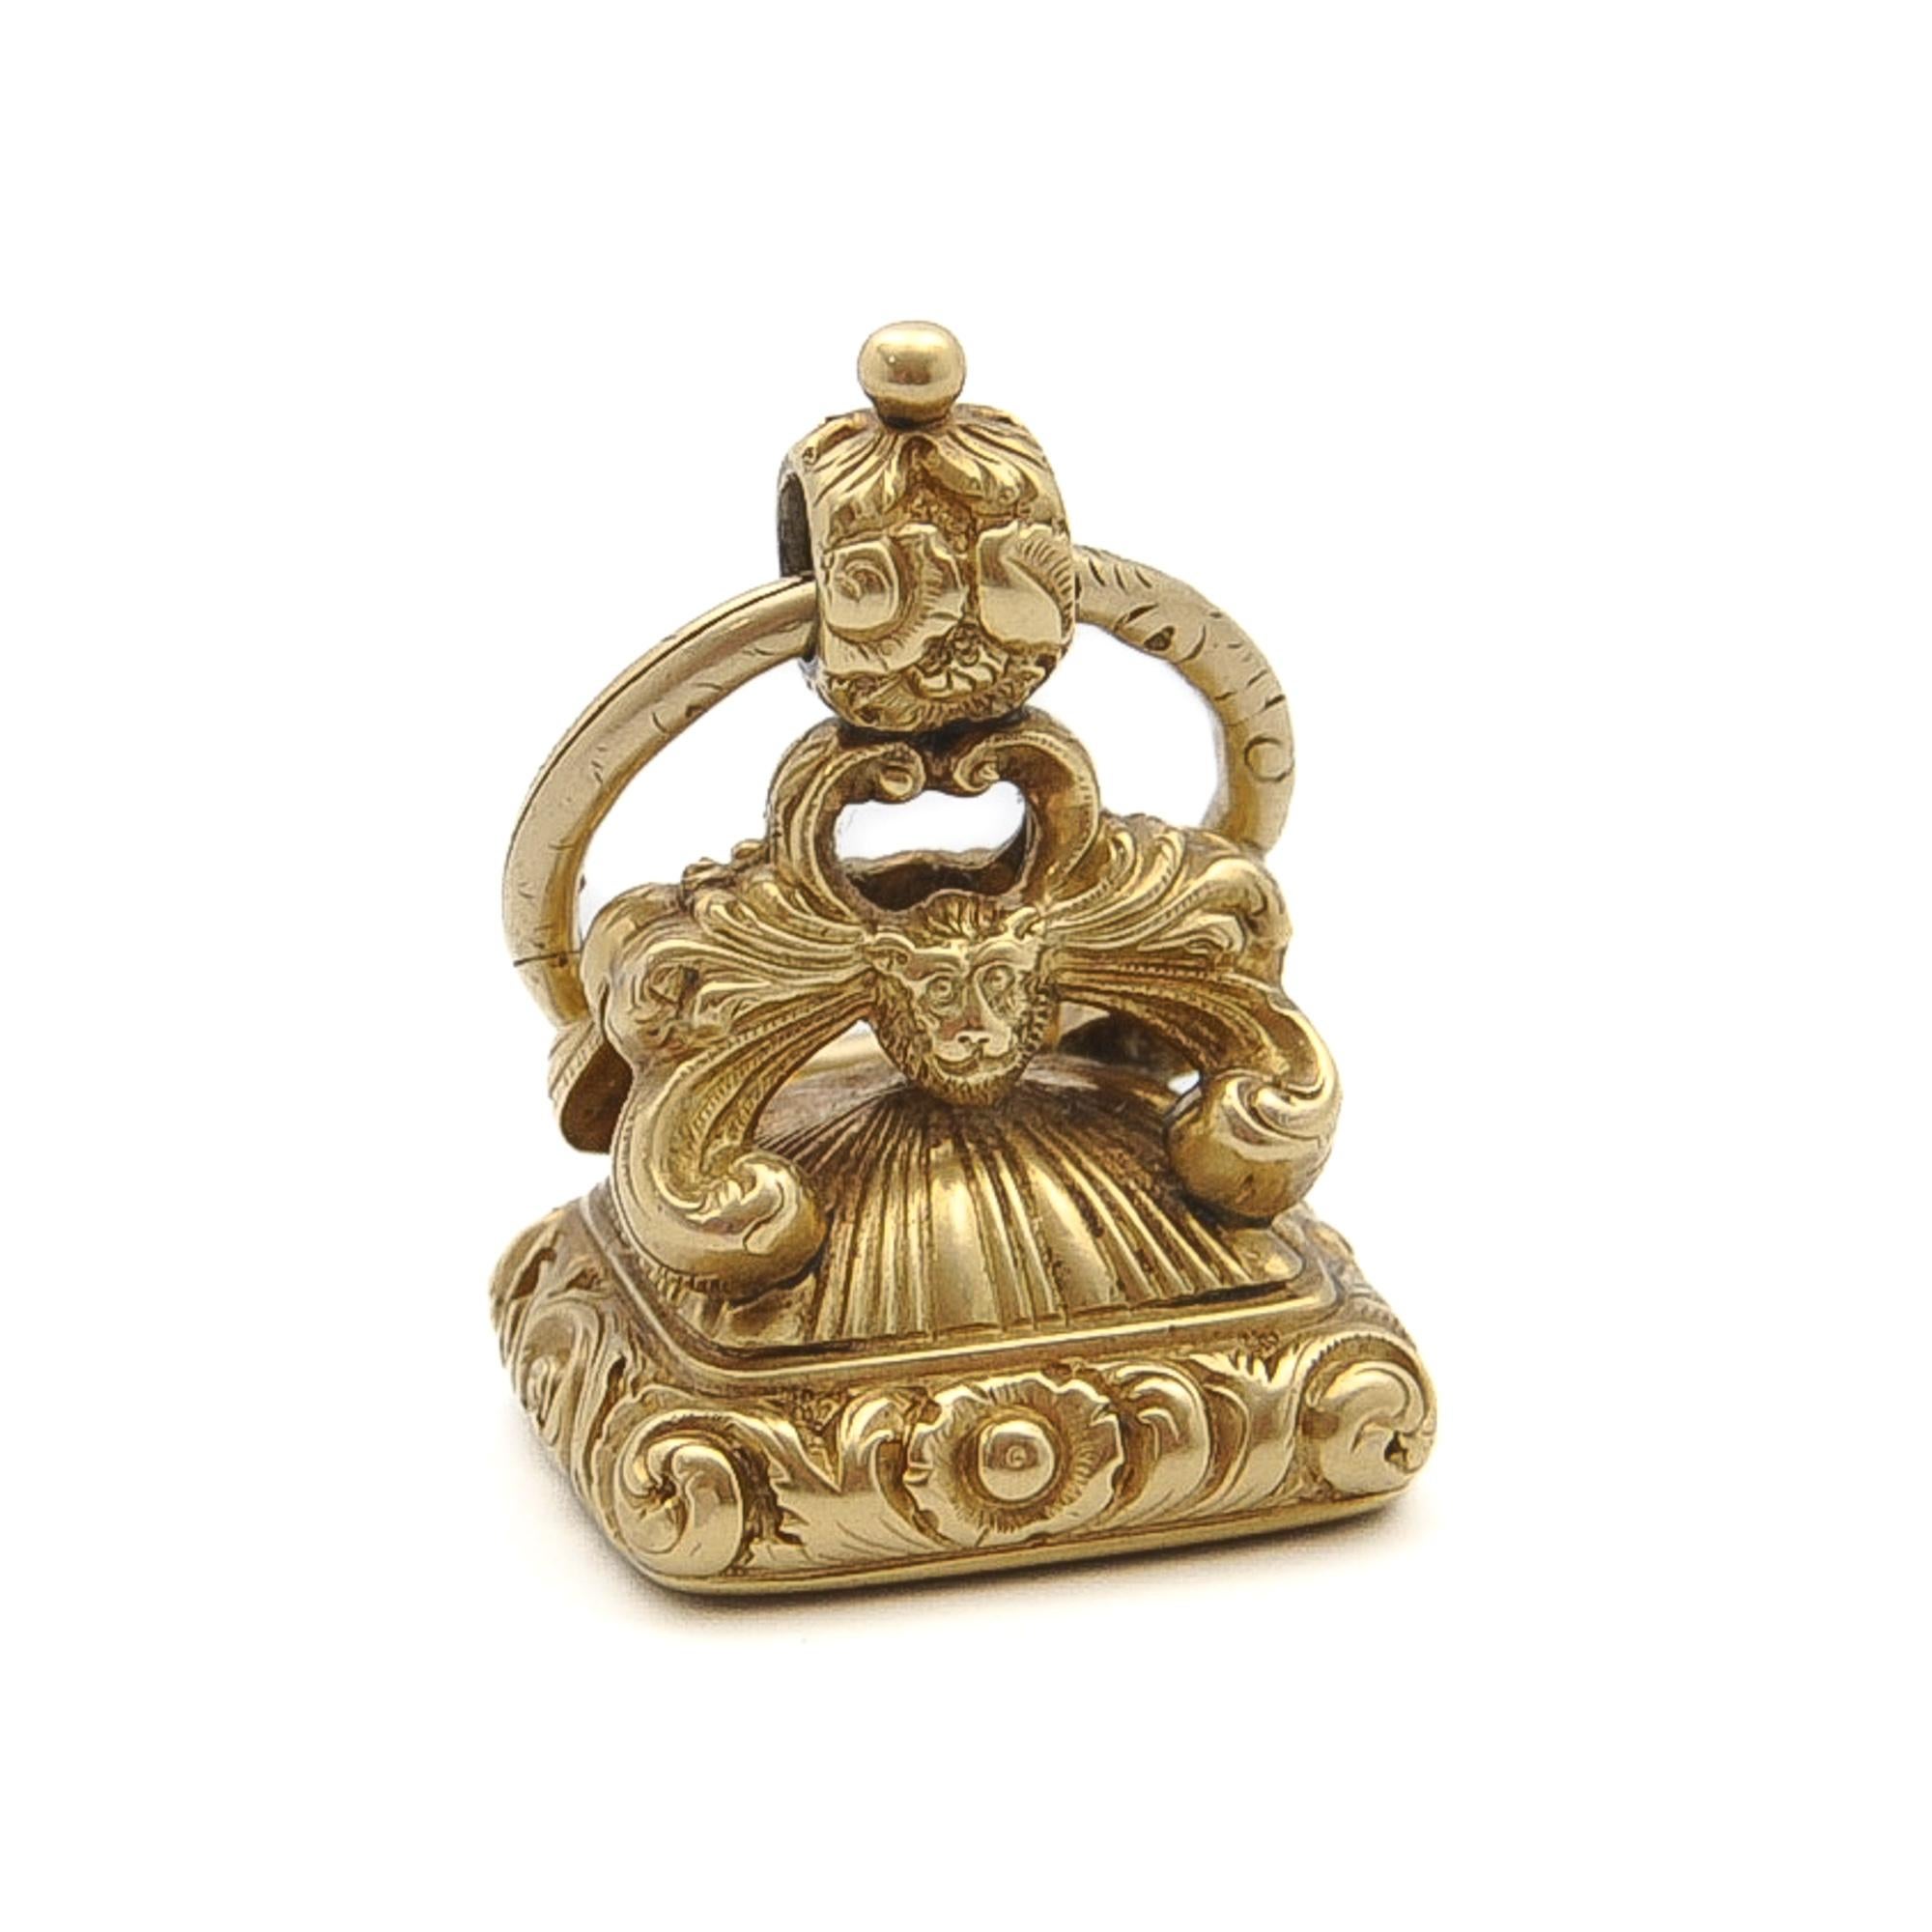 Antique Victorian 15K Gold and Carnelian Ornate Fob Charm Pendant For Sale 4